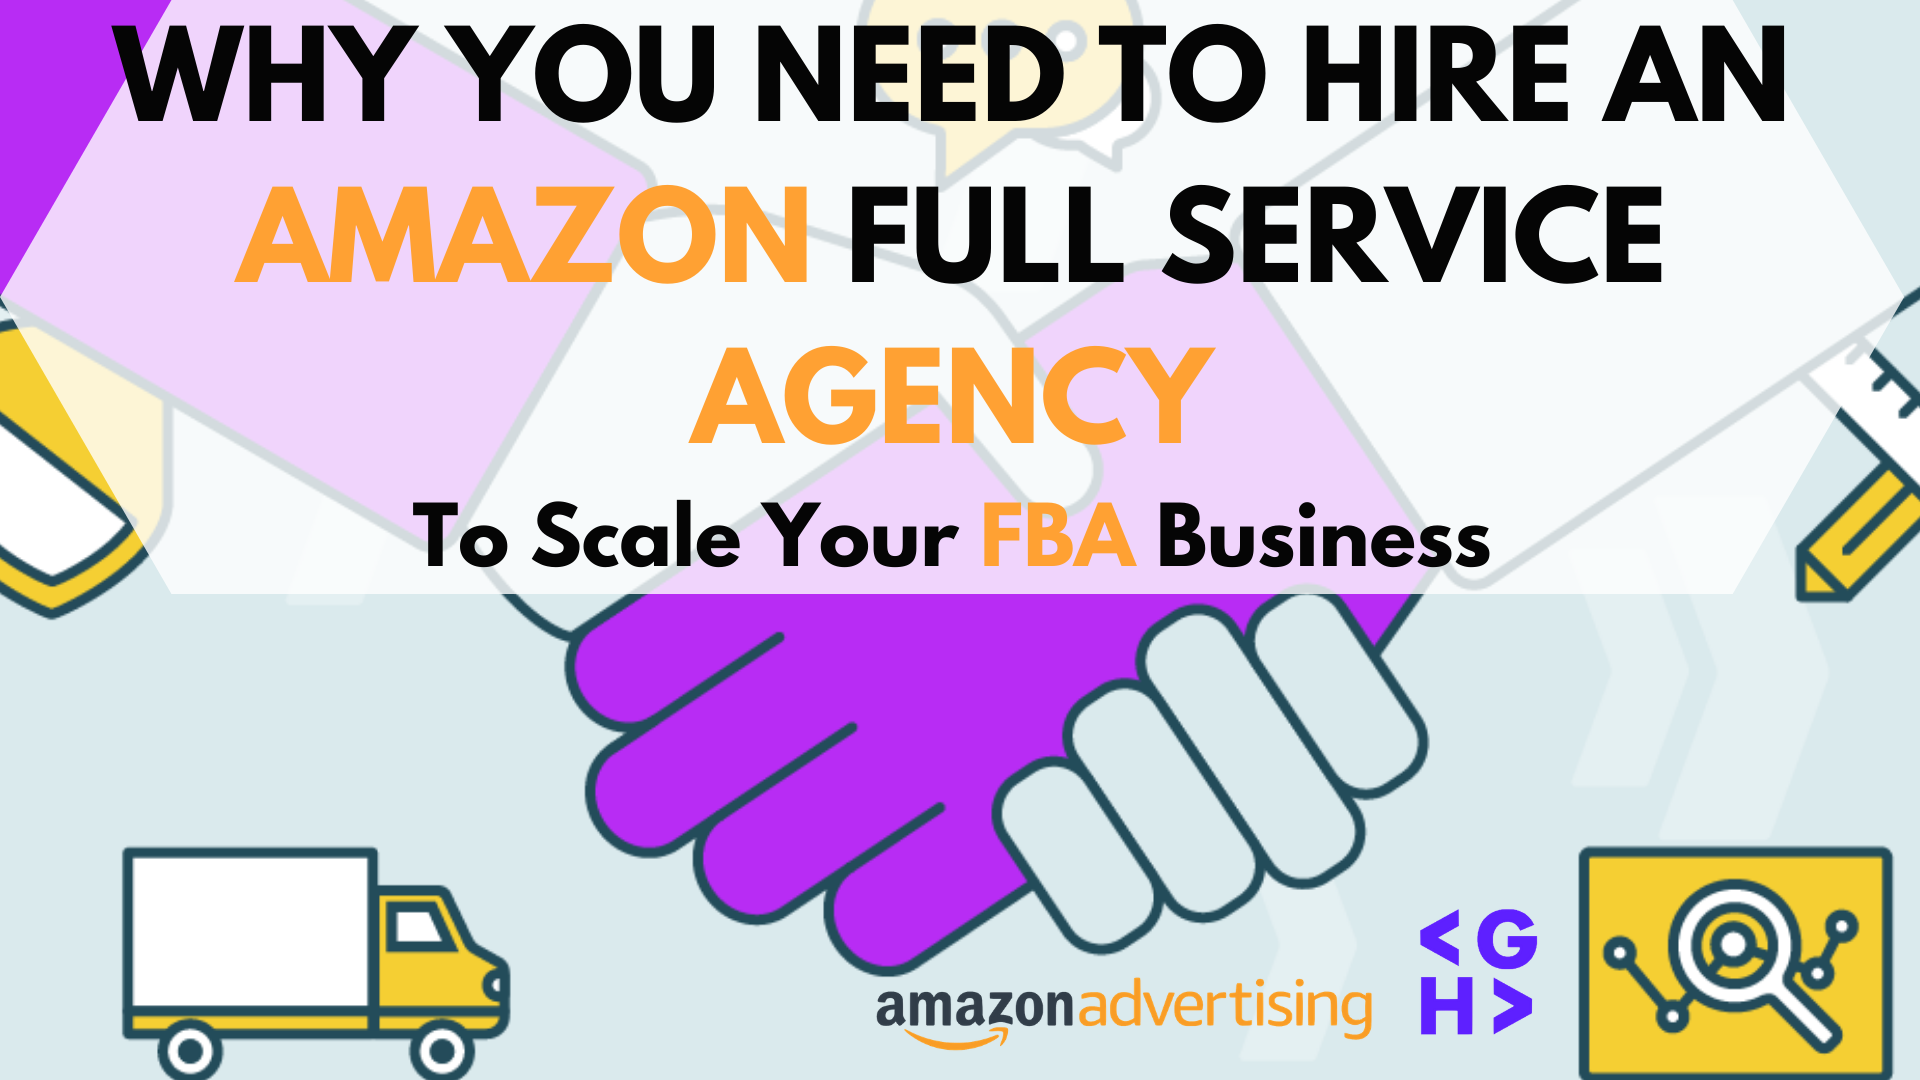 Why Should You Hire a Full Service Agency To Scale Your Amazon FBA Business